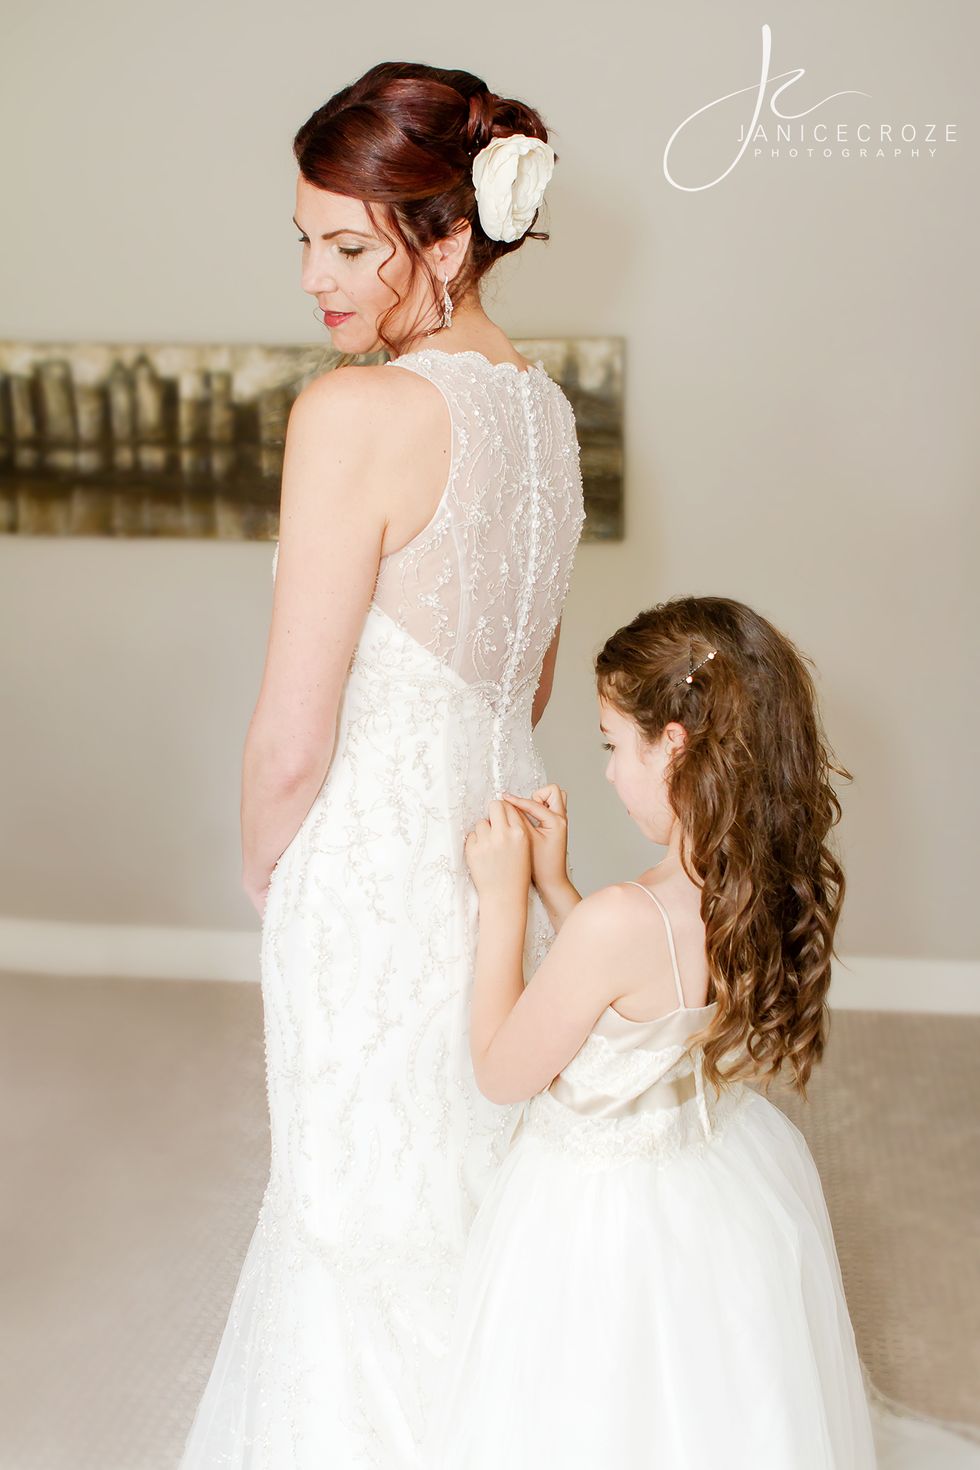 An Open Letter to my Mom on her Wedding Day